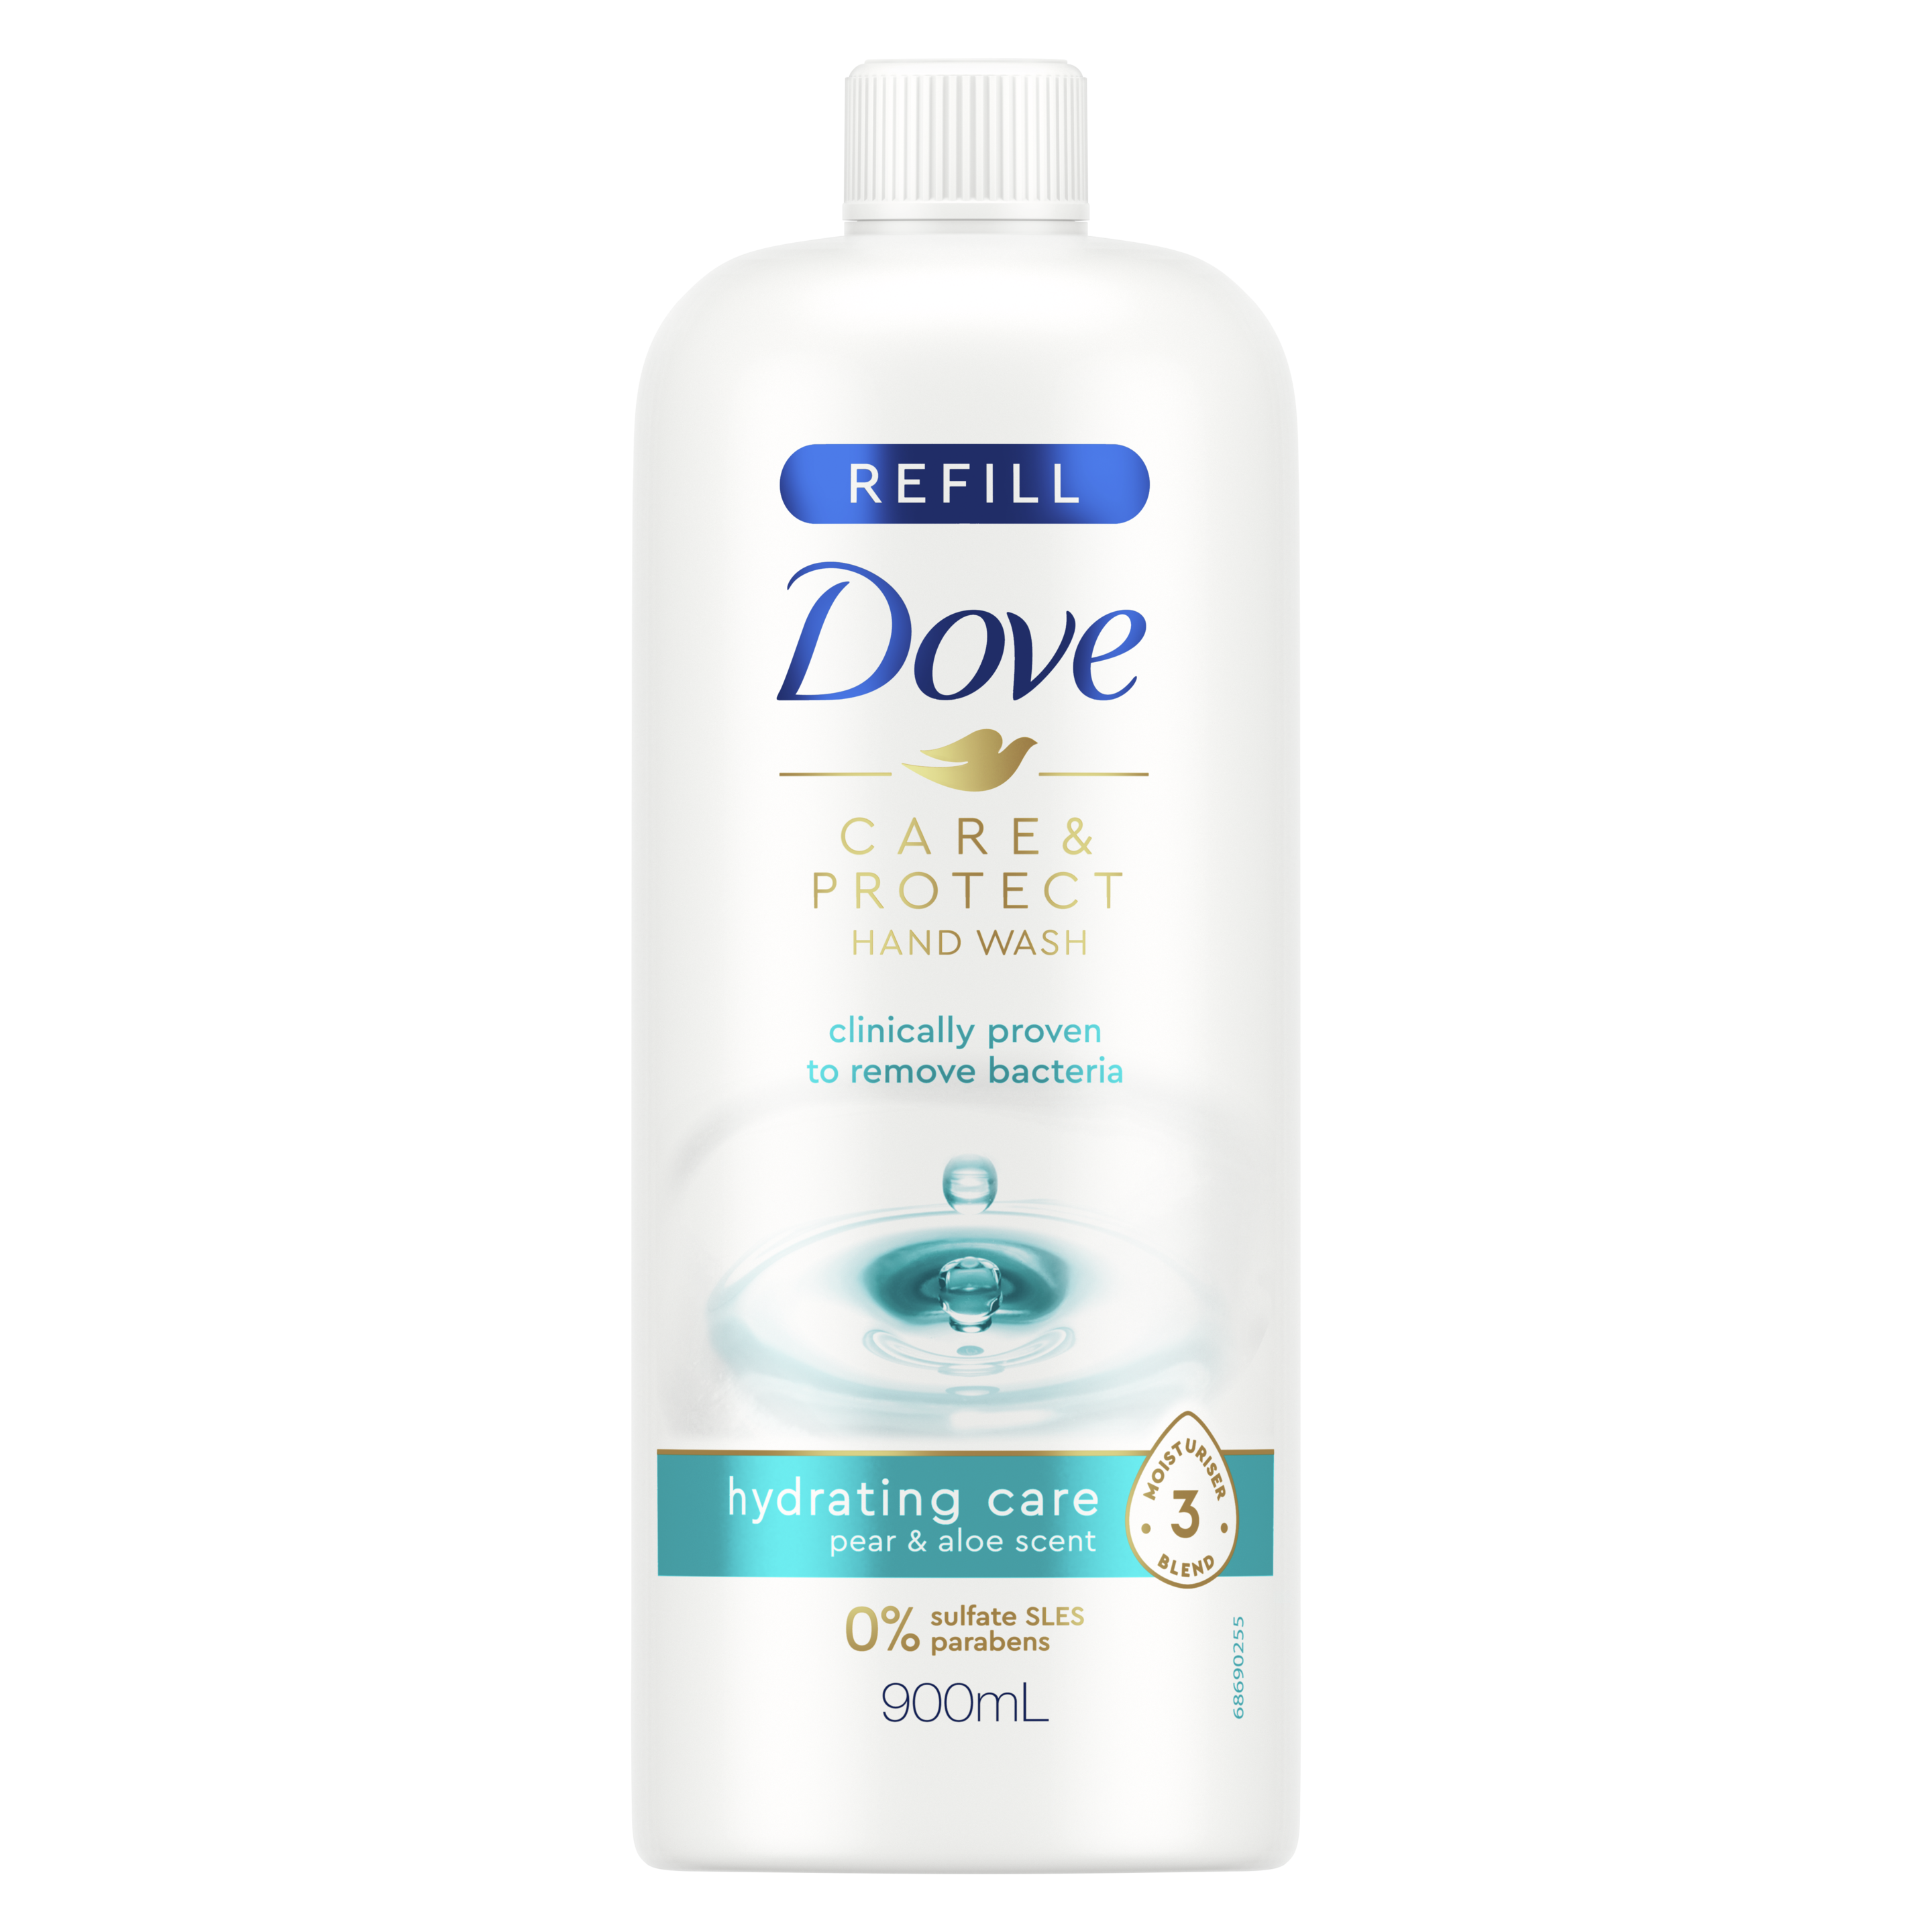 Dove Hydrating Care Hand Wash Refill 900ml Text